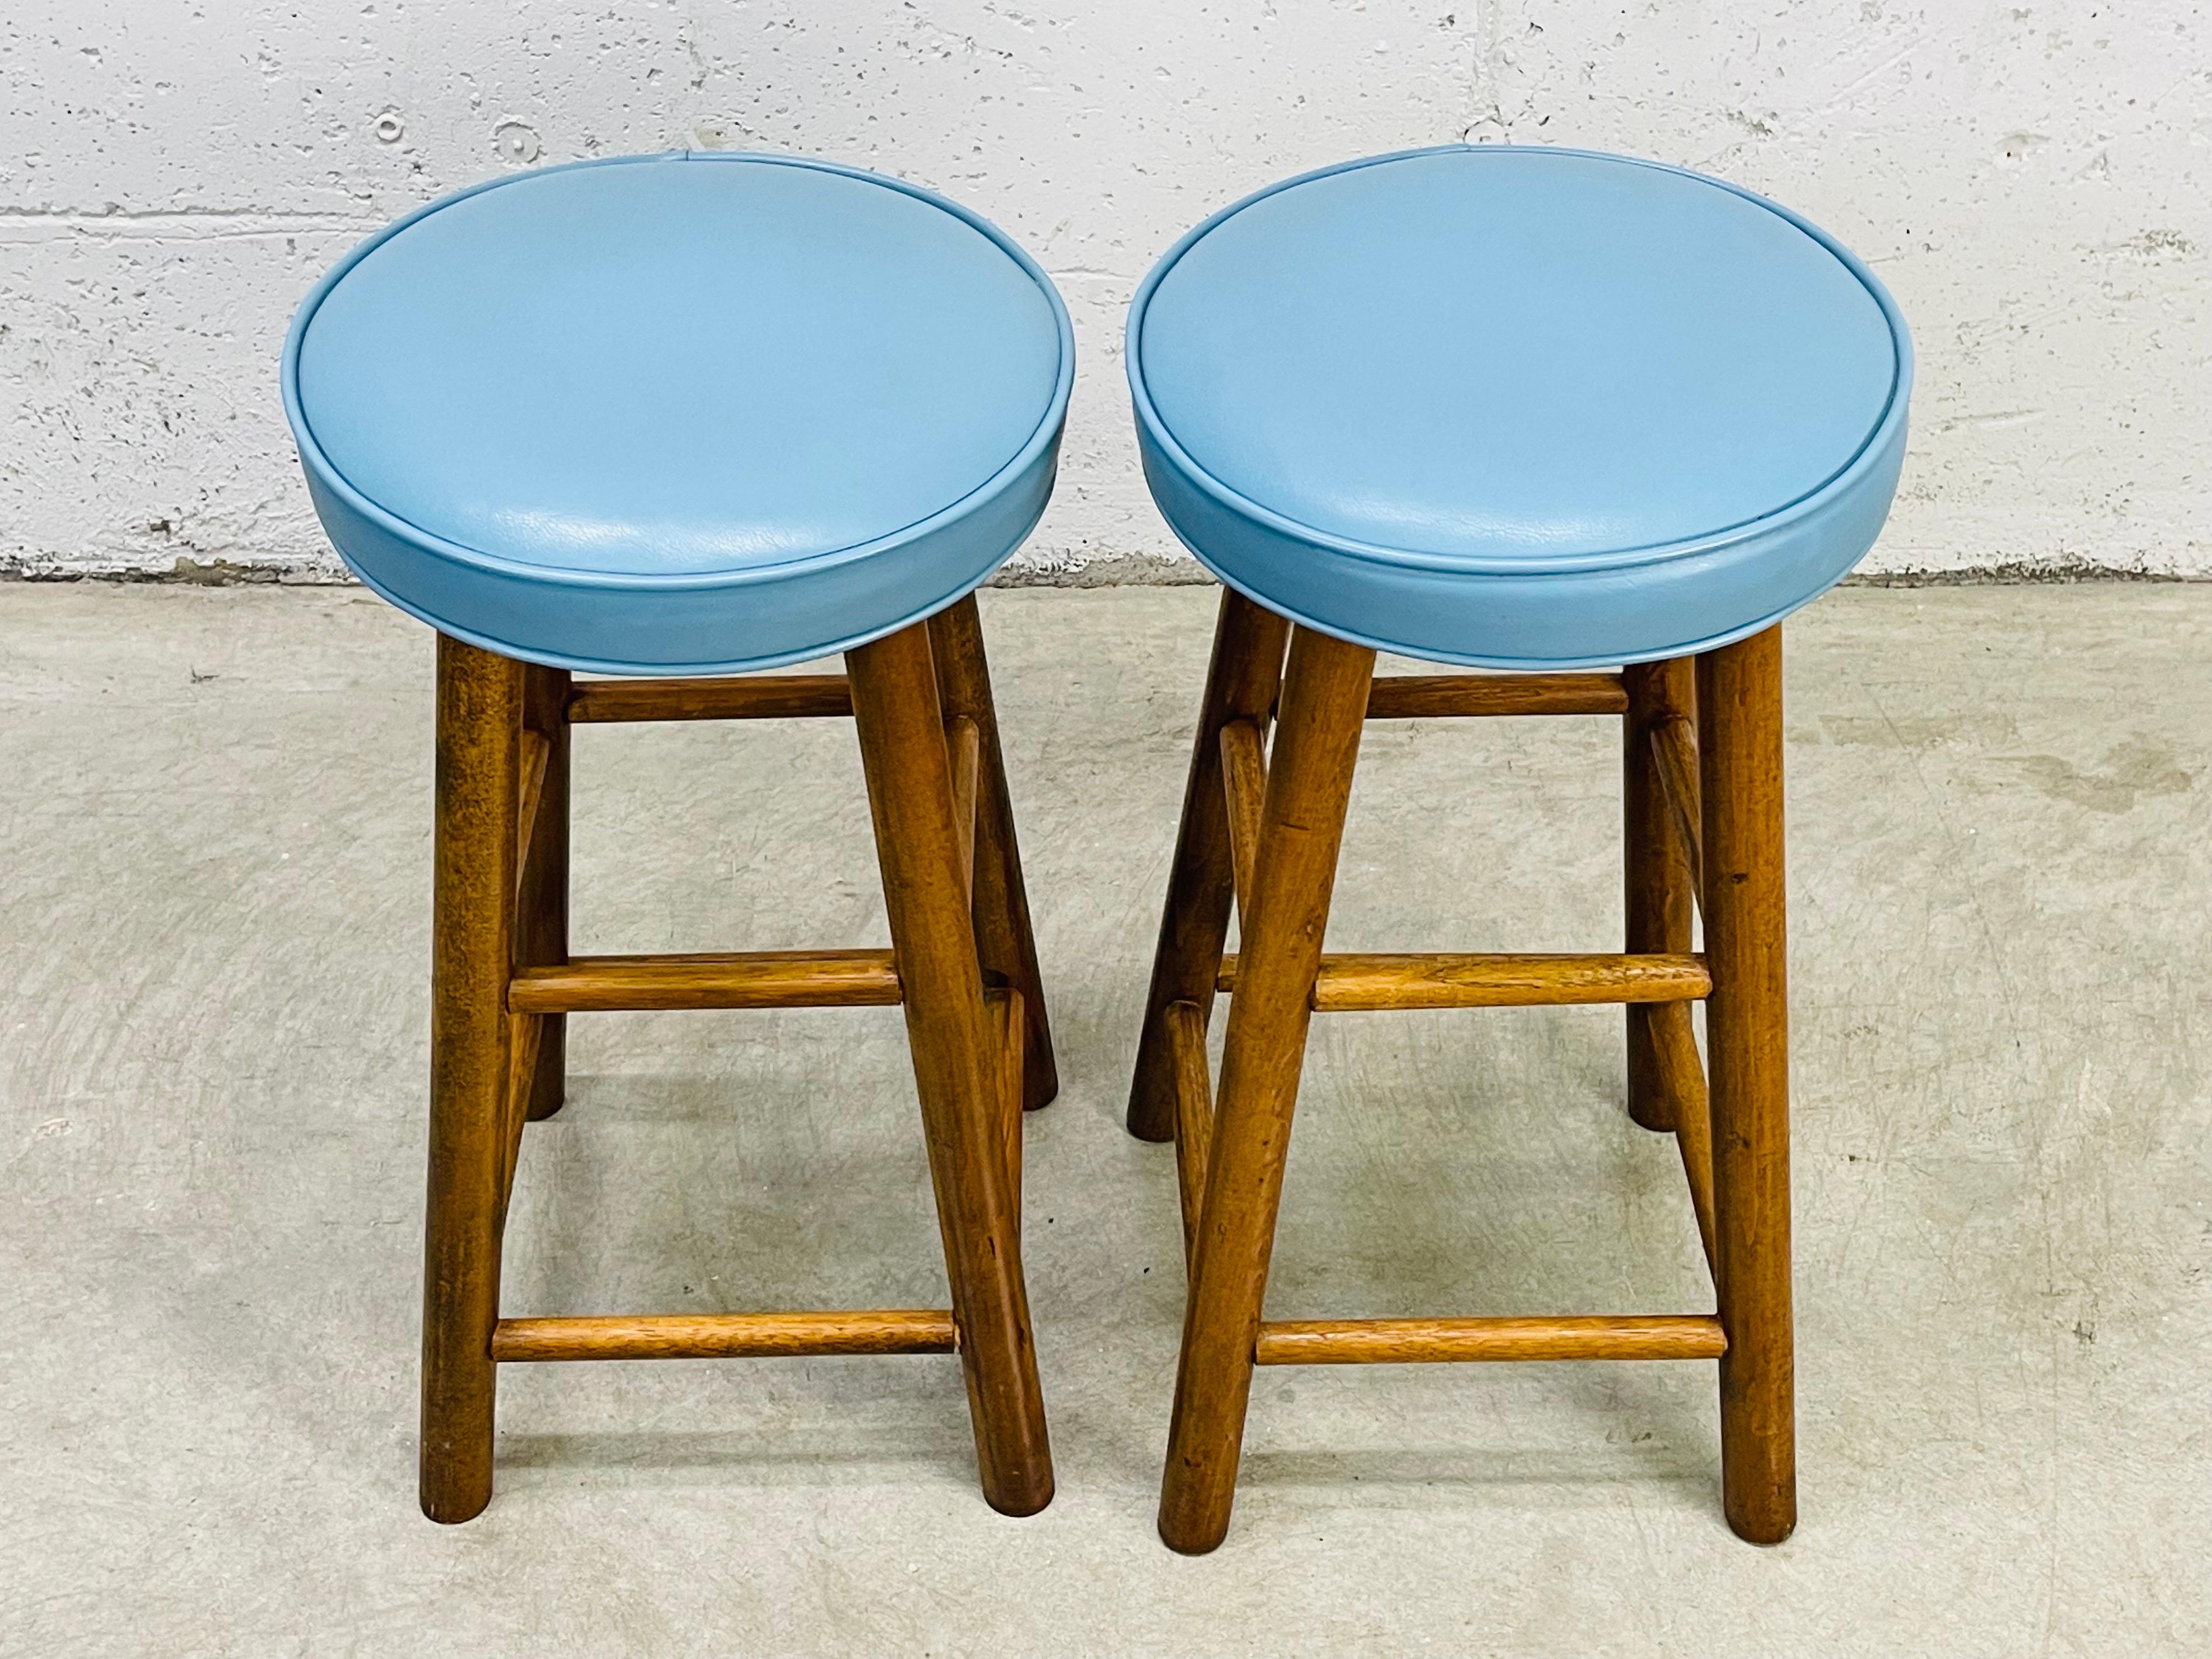 Vintage 1960s pair of blue round vinyl top low bar stools with a maple wood base. Vinyl is in excellent condition and the stools are both sturdy. No marks.